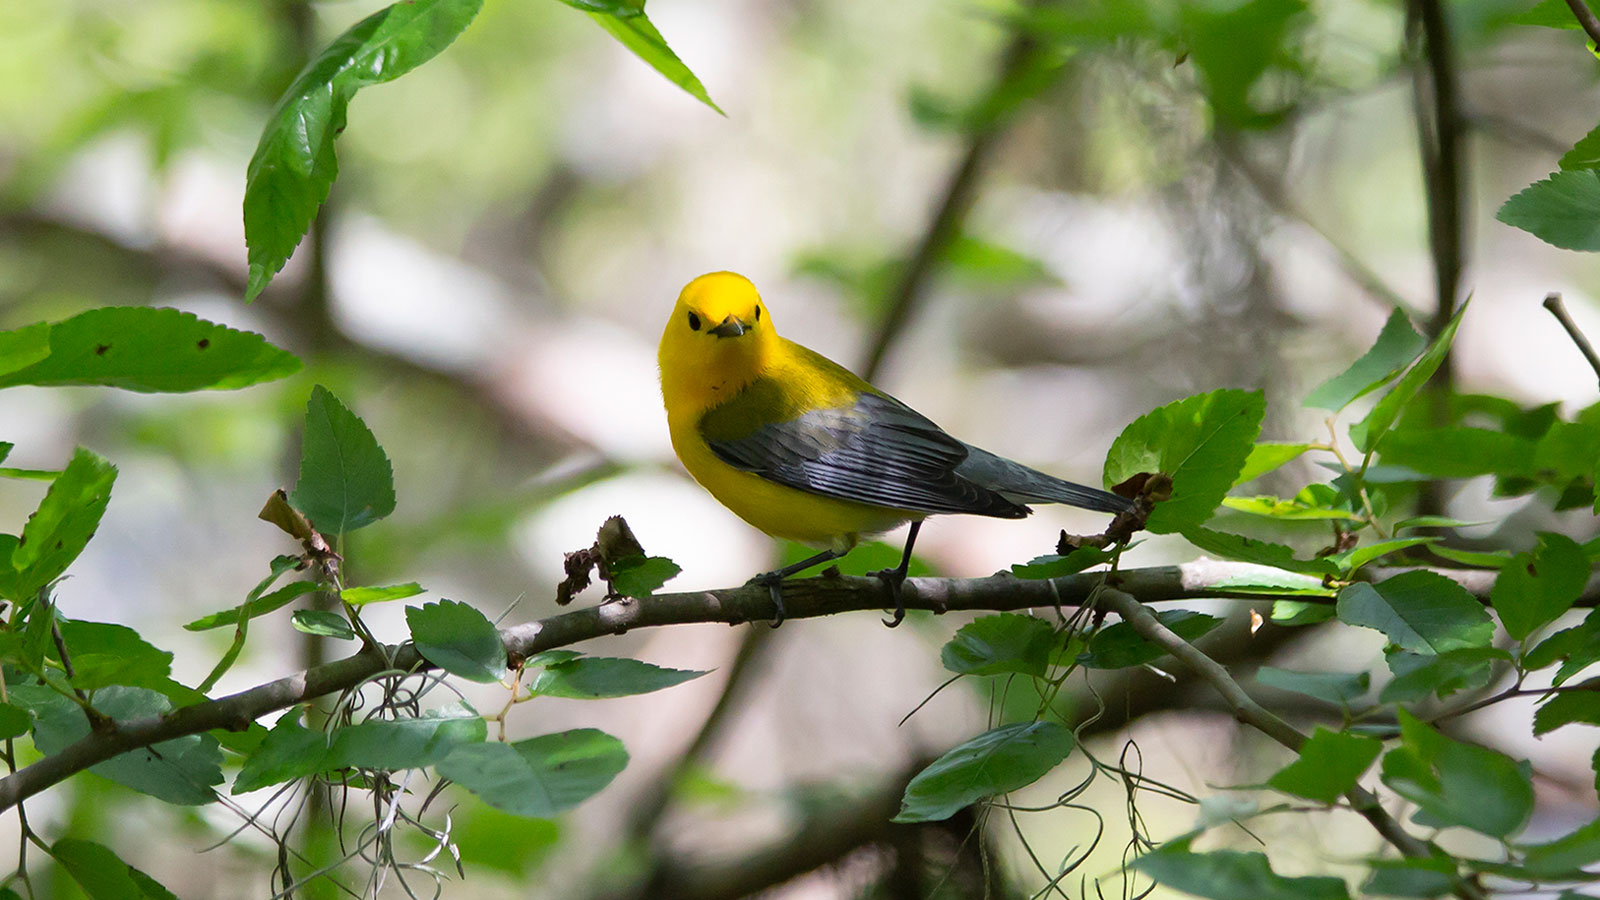 Prothonotary warbler looking out from its perch on a branch